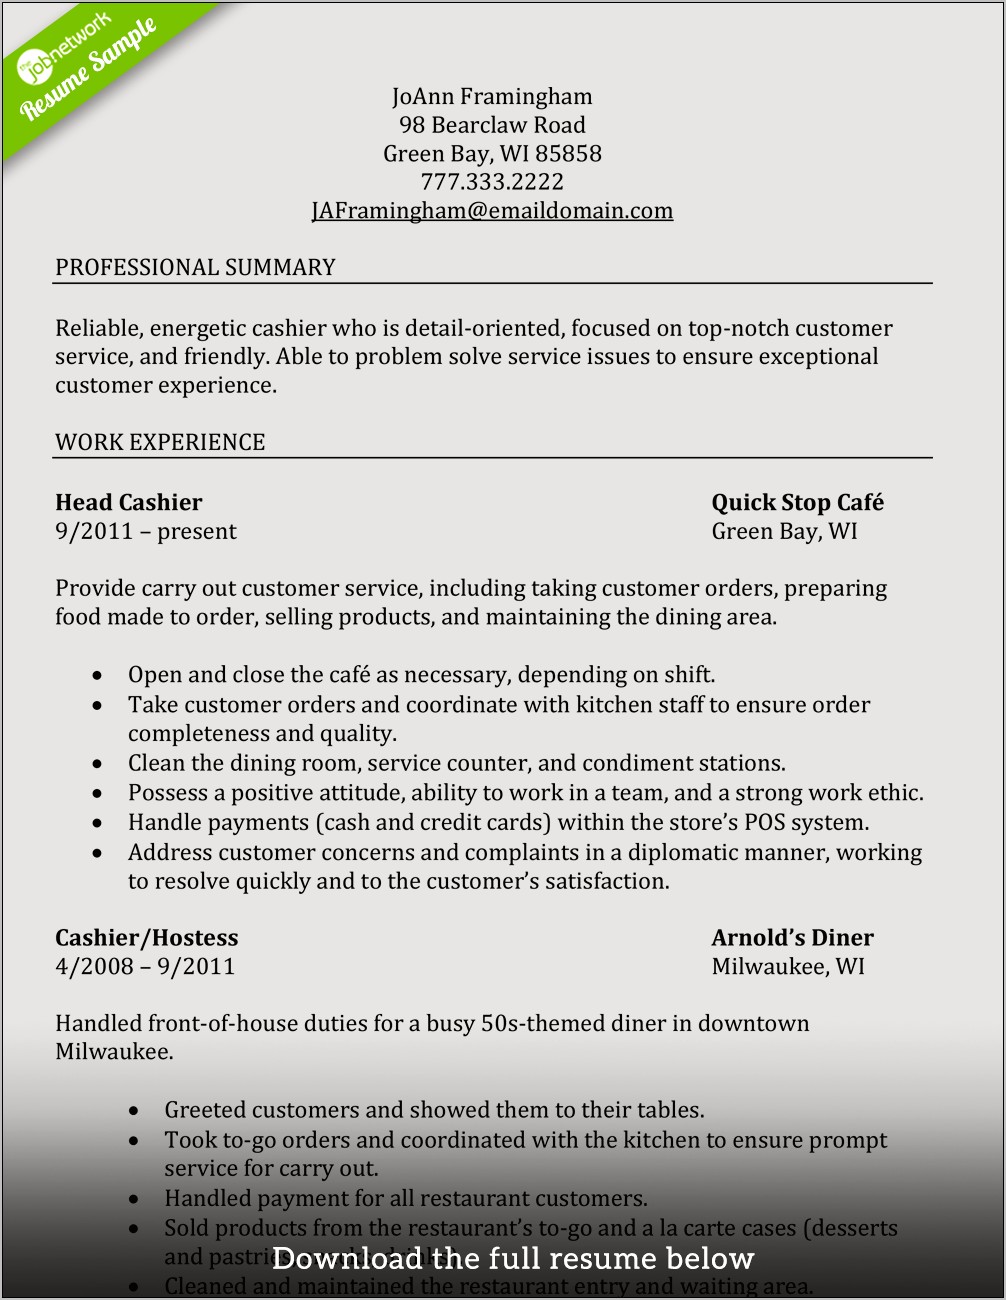 Are Bullets Or Summaries Better On A Resume